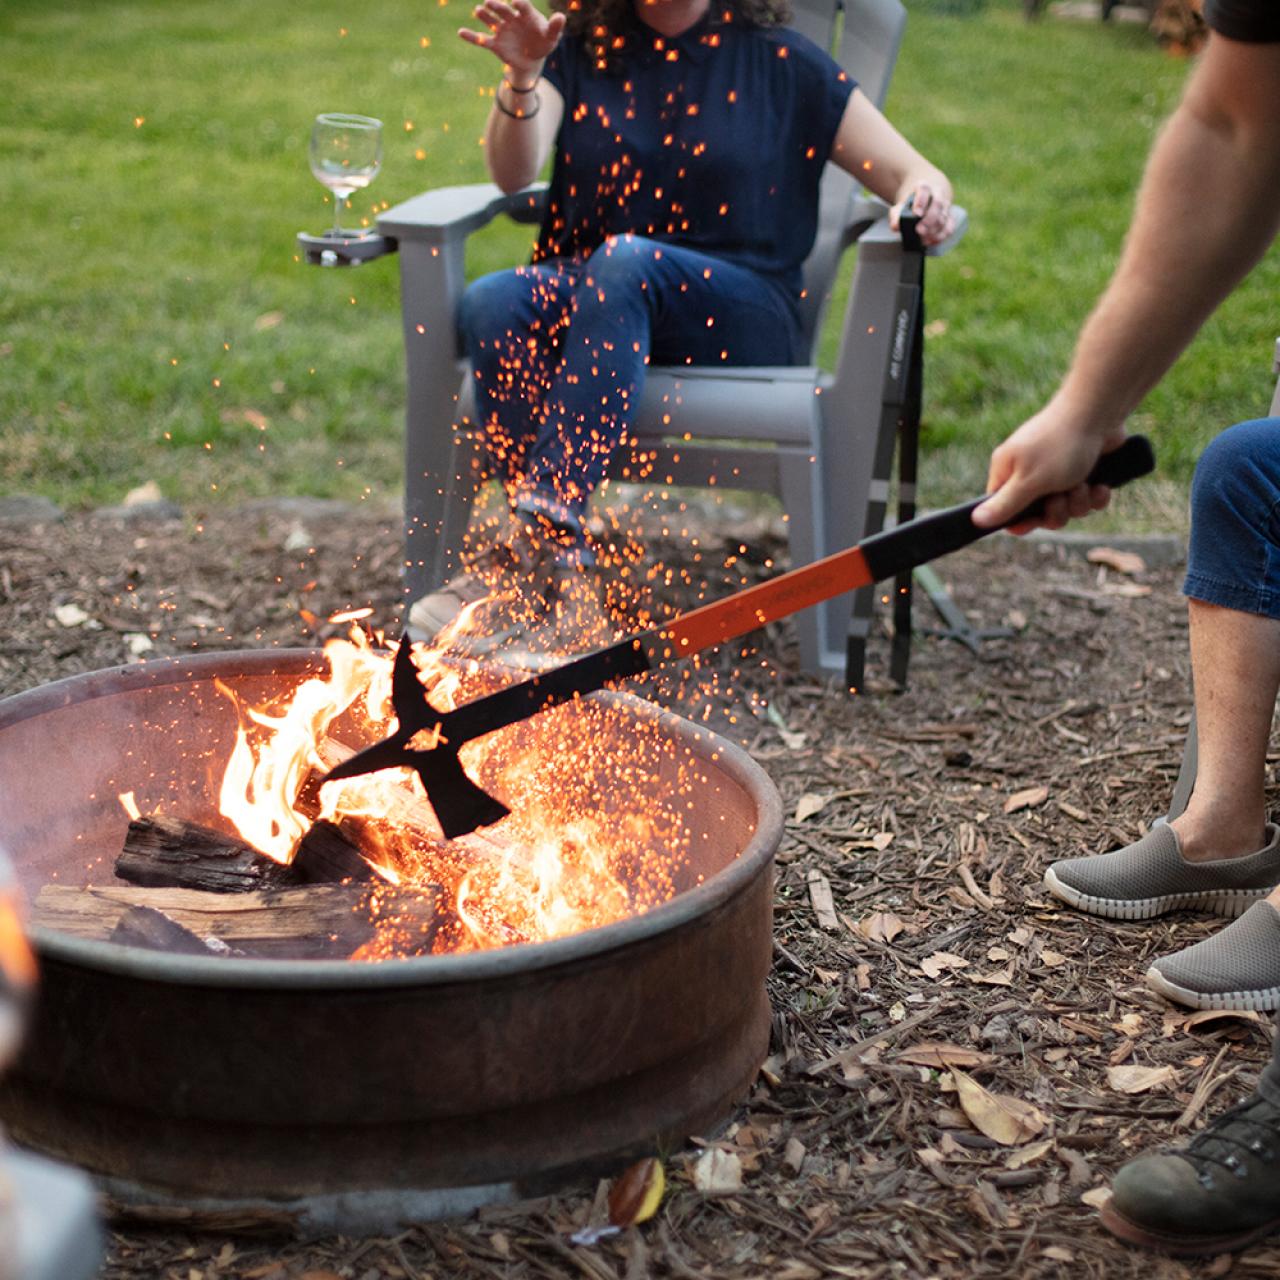 What To Put Under A Fire Pit On Grass